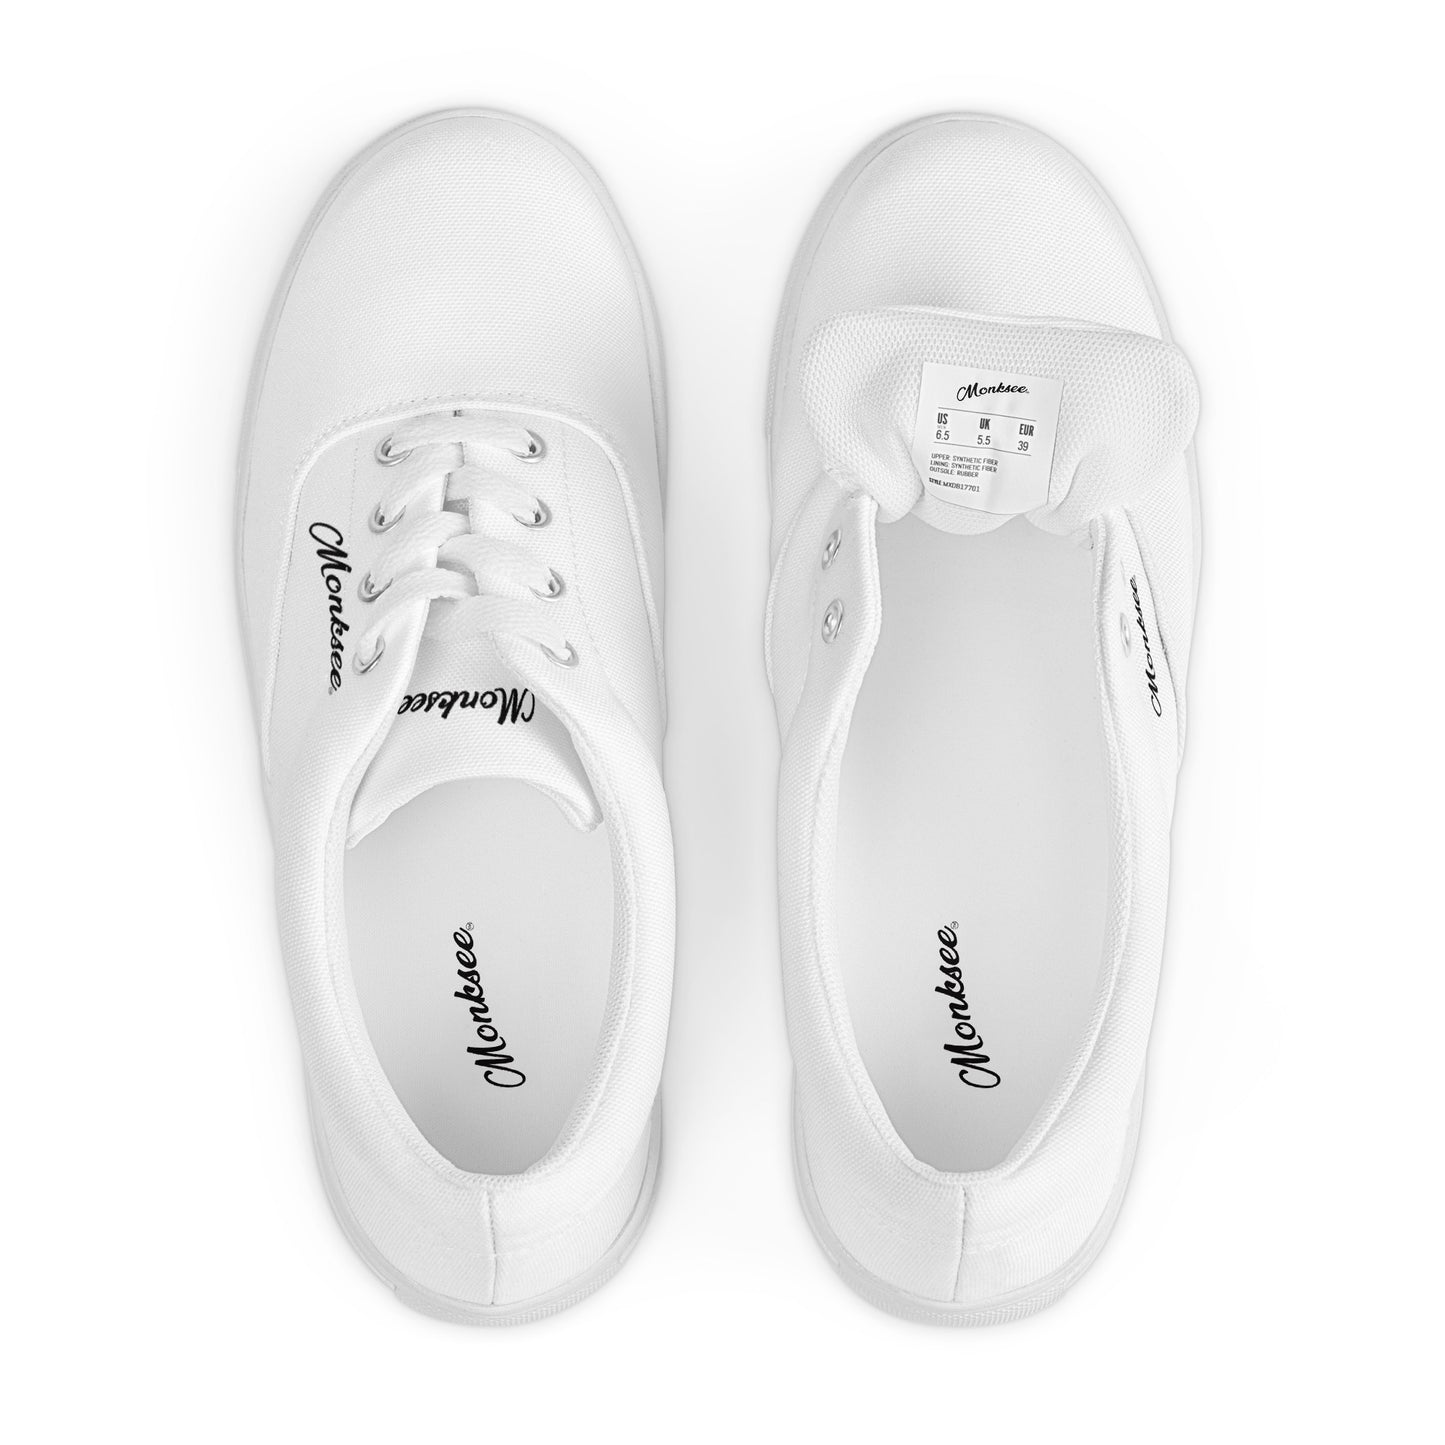 Stoked white - Men's Canvas shoes.